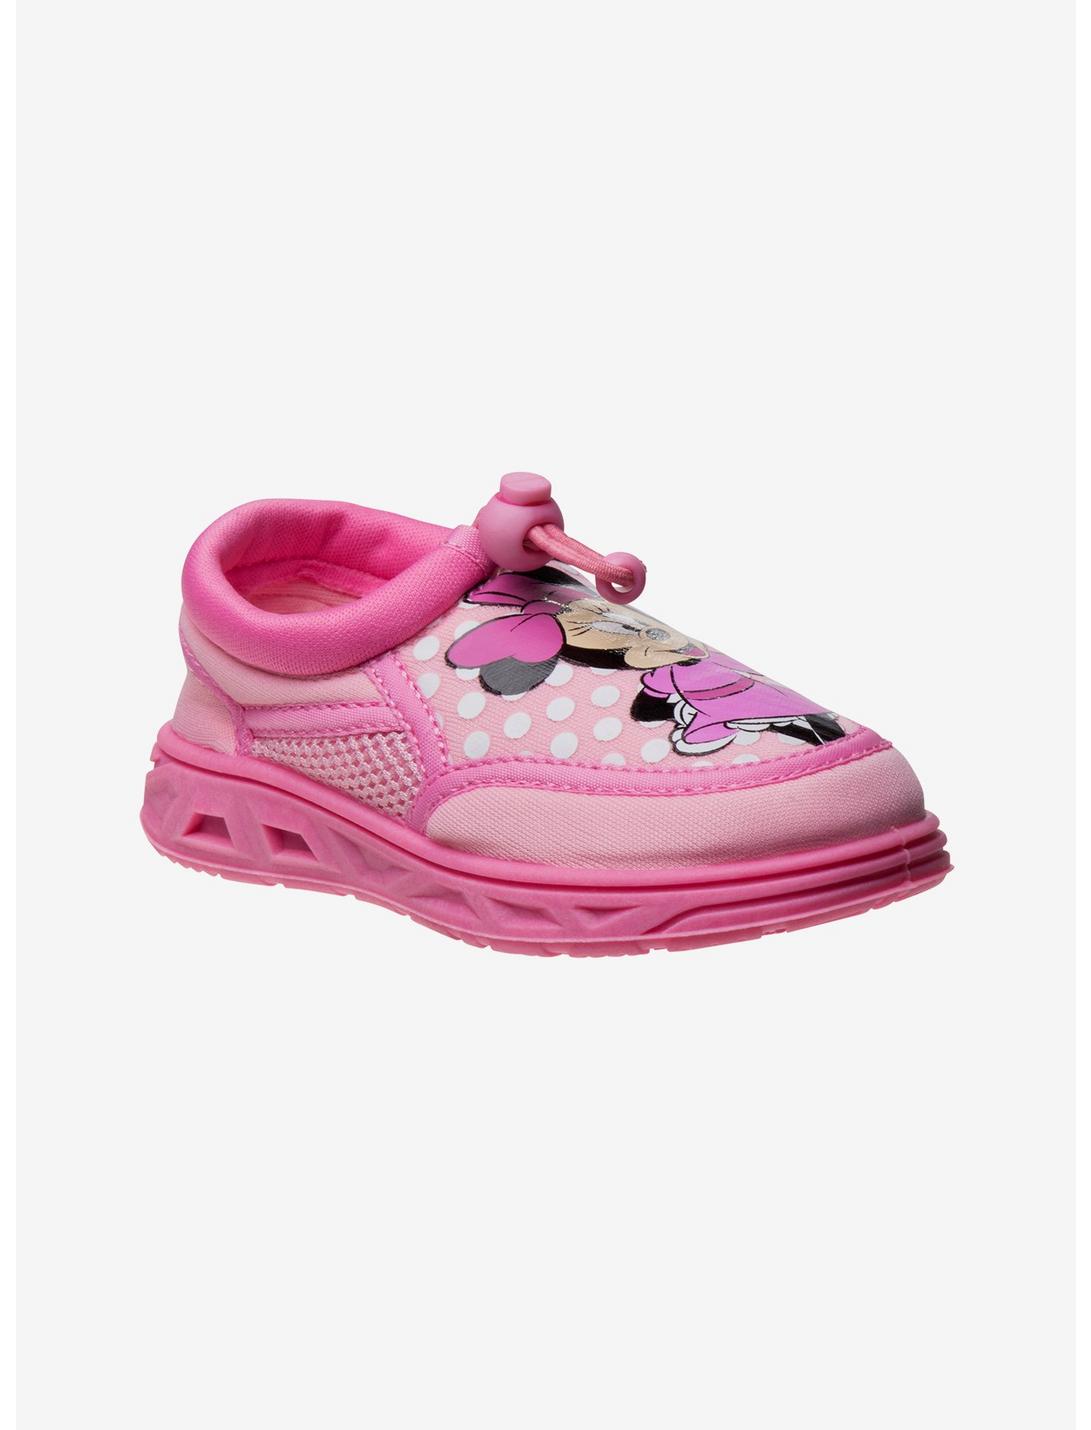 Disney Minnie Mouse Girls Water Shoes, PINK, hi-res